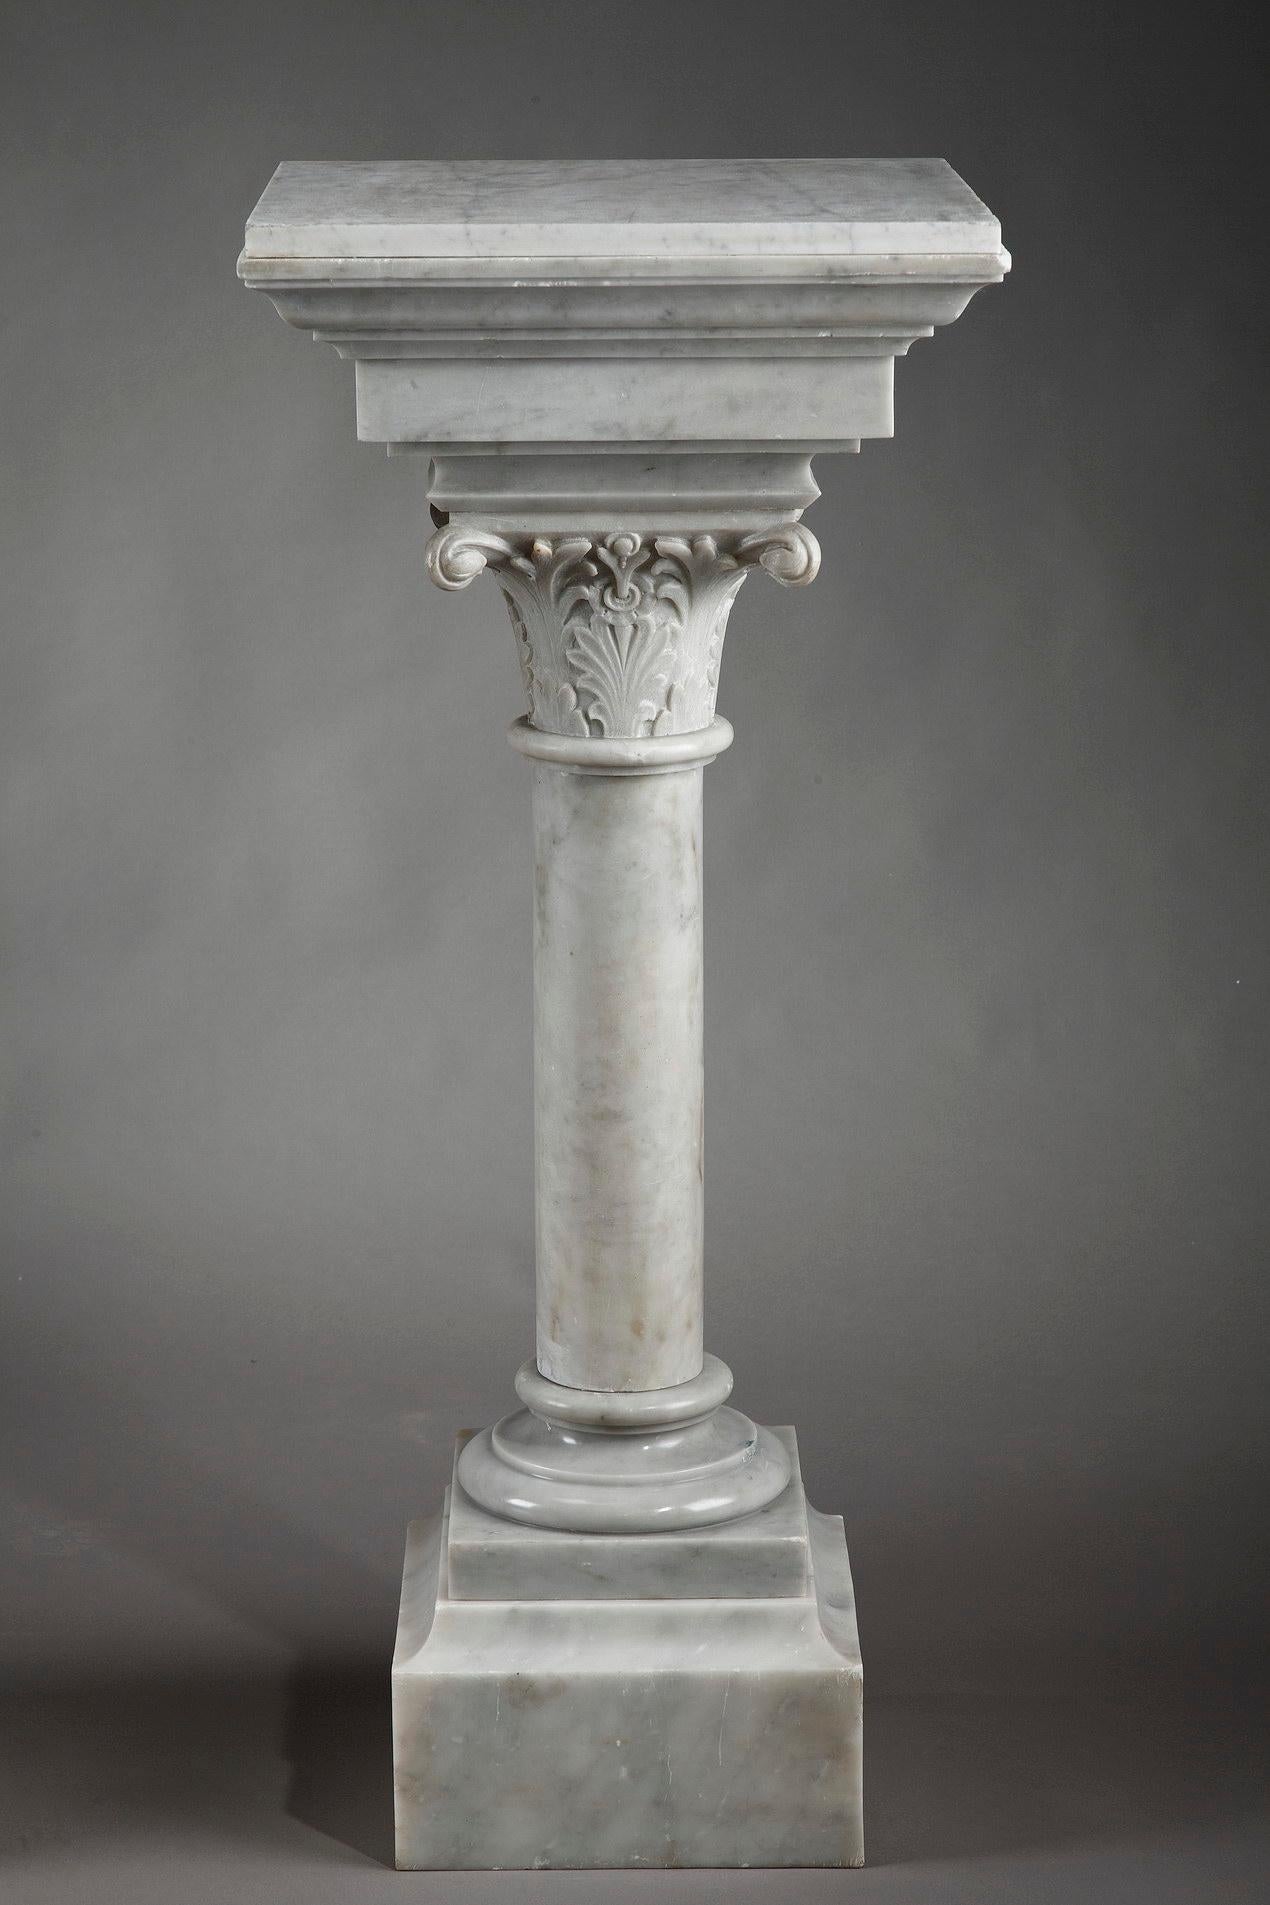 Pair of white marble column pedestal stands with large display plate. Crafted in the second half of the 19th century, these elegant French pedestals are complete with finely sculpted foliated capitals and large bands around the base, 

circa